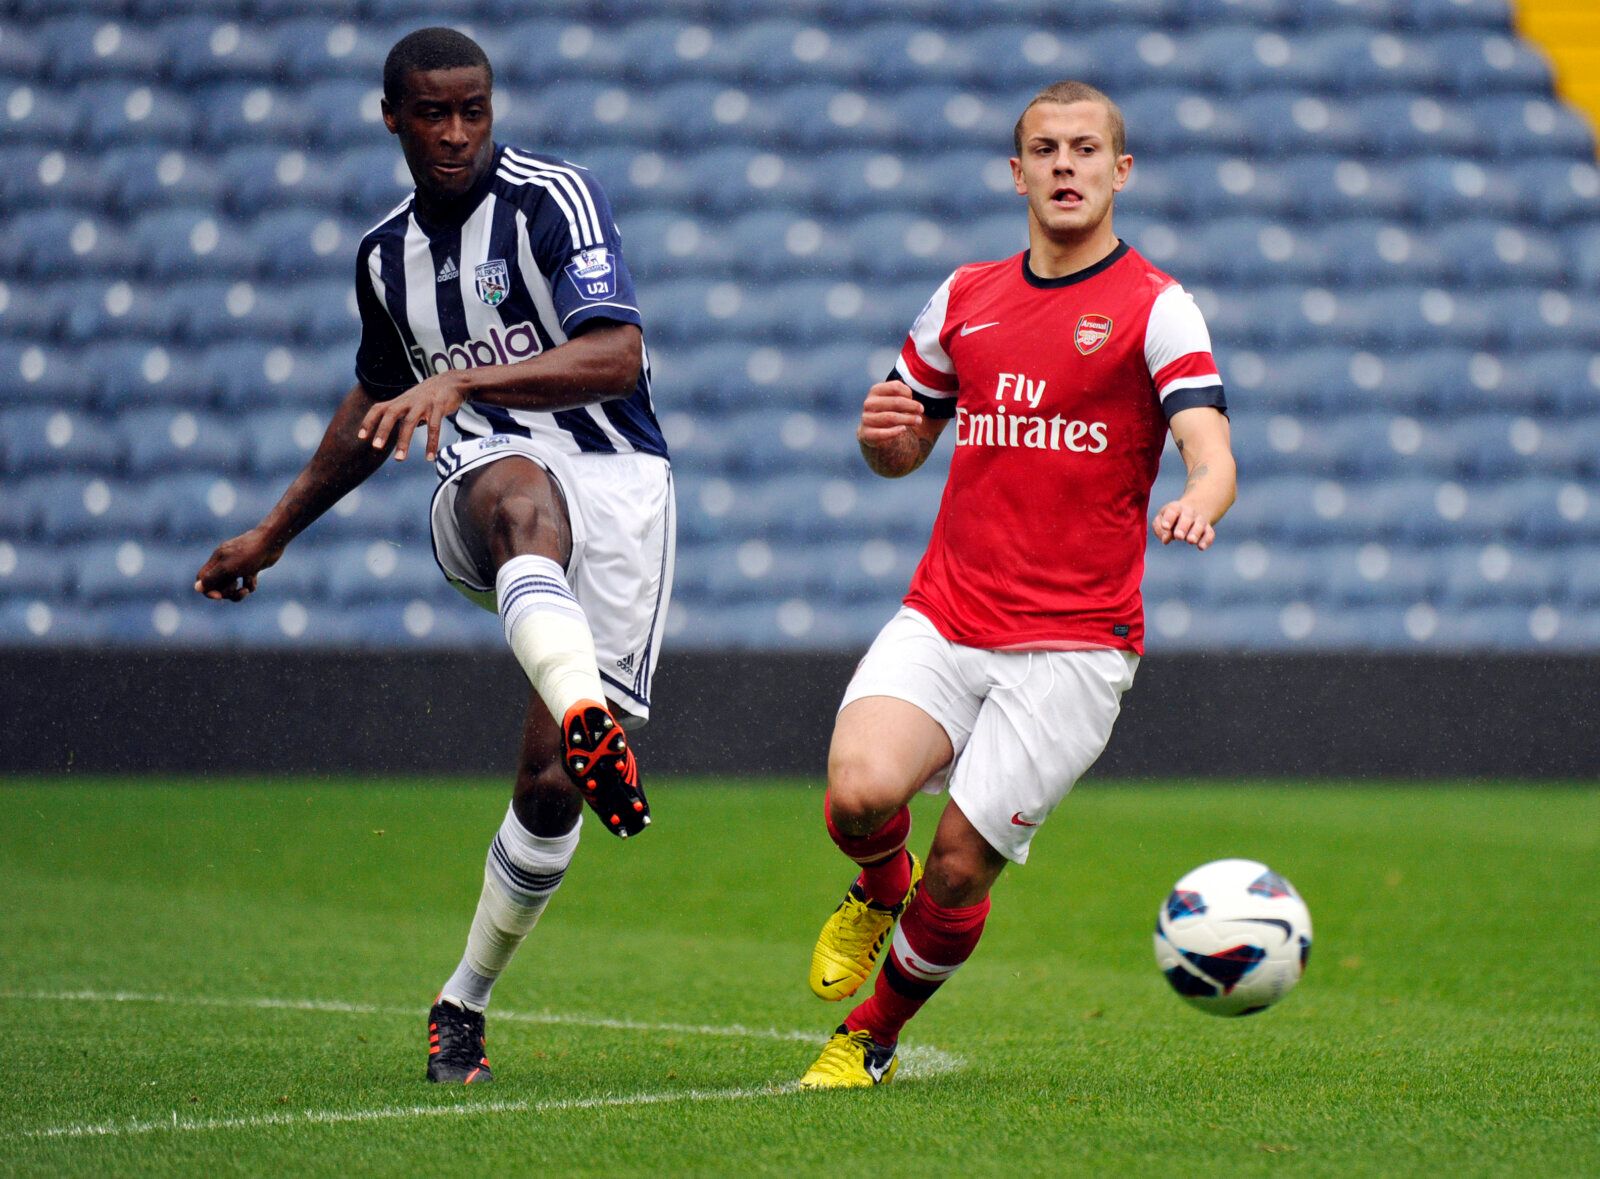 Football - West Bromwich Albion v Arsenal Barclays Under-21 Premier League - The Hawthorns - 1/10/12 
Arsenal's Jack Wilshere (R) and West Brom's Donervon Daniels  
Mandatory Credit: Action Images / Adam Holt 
Livepic